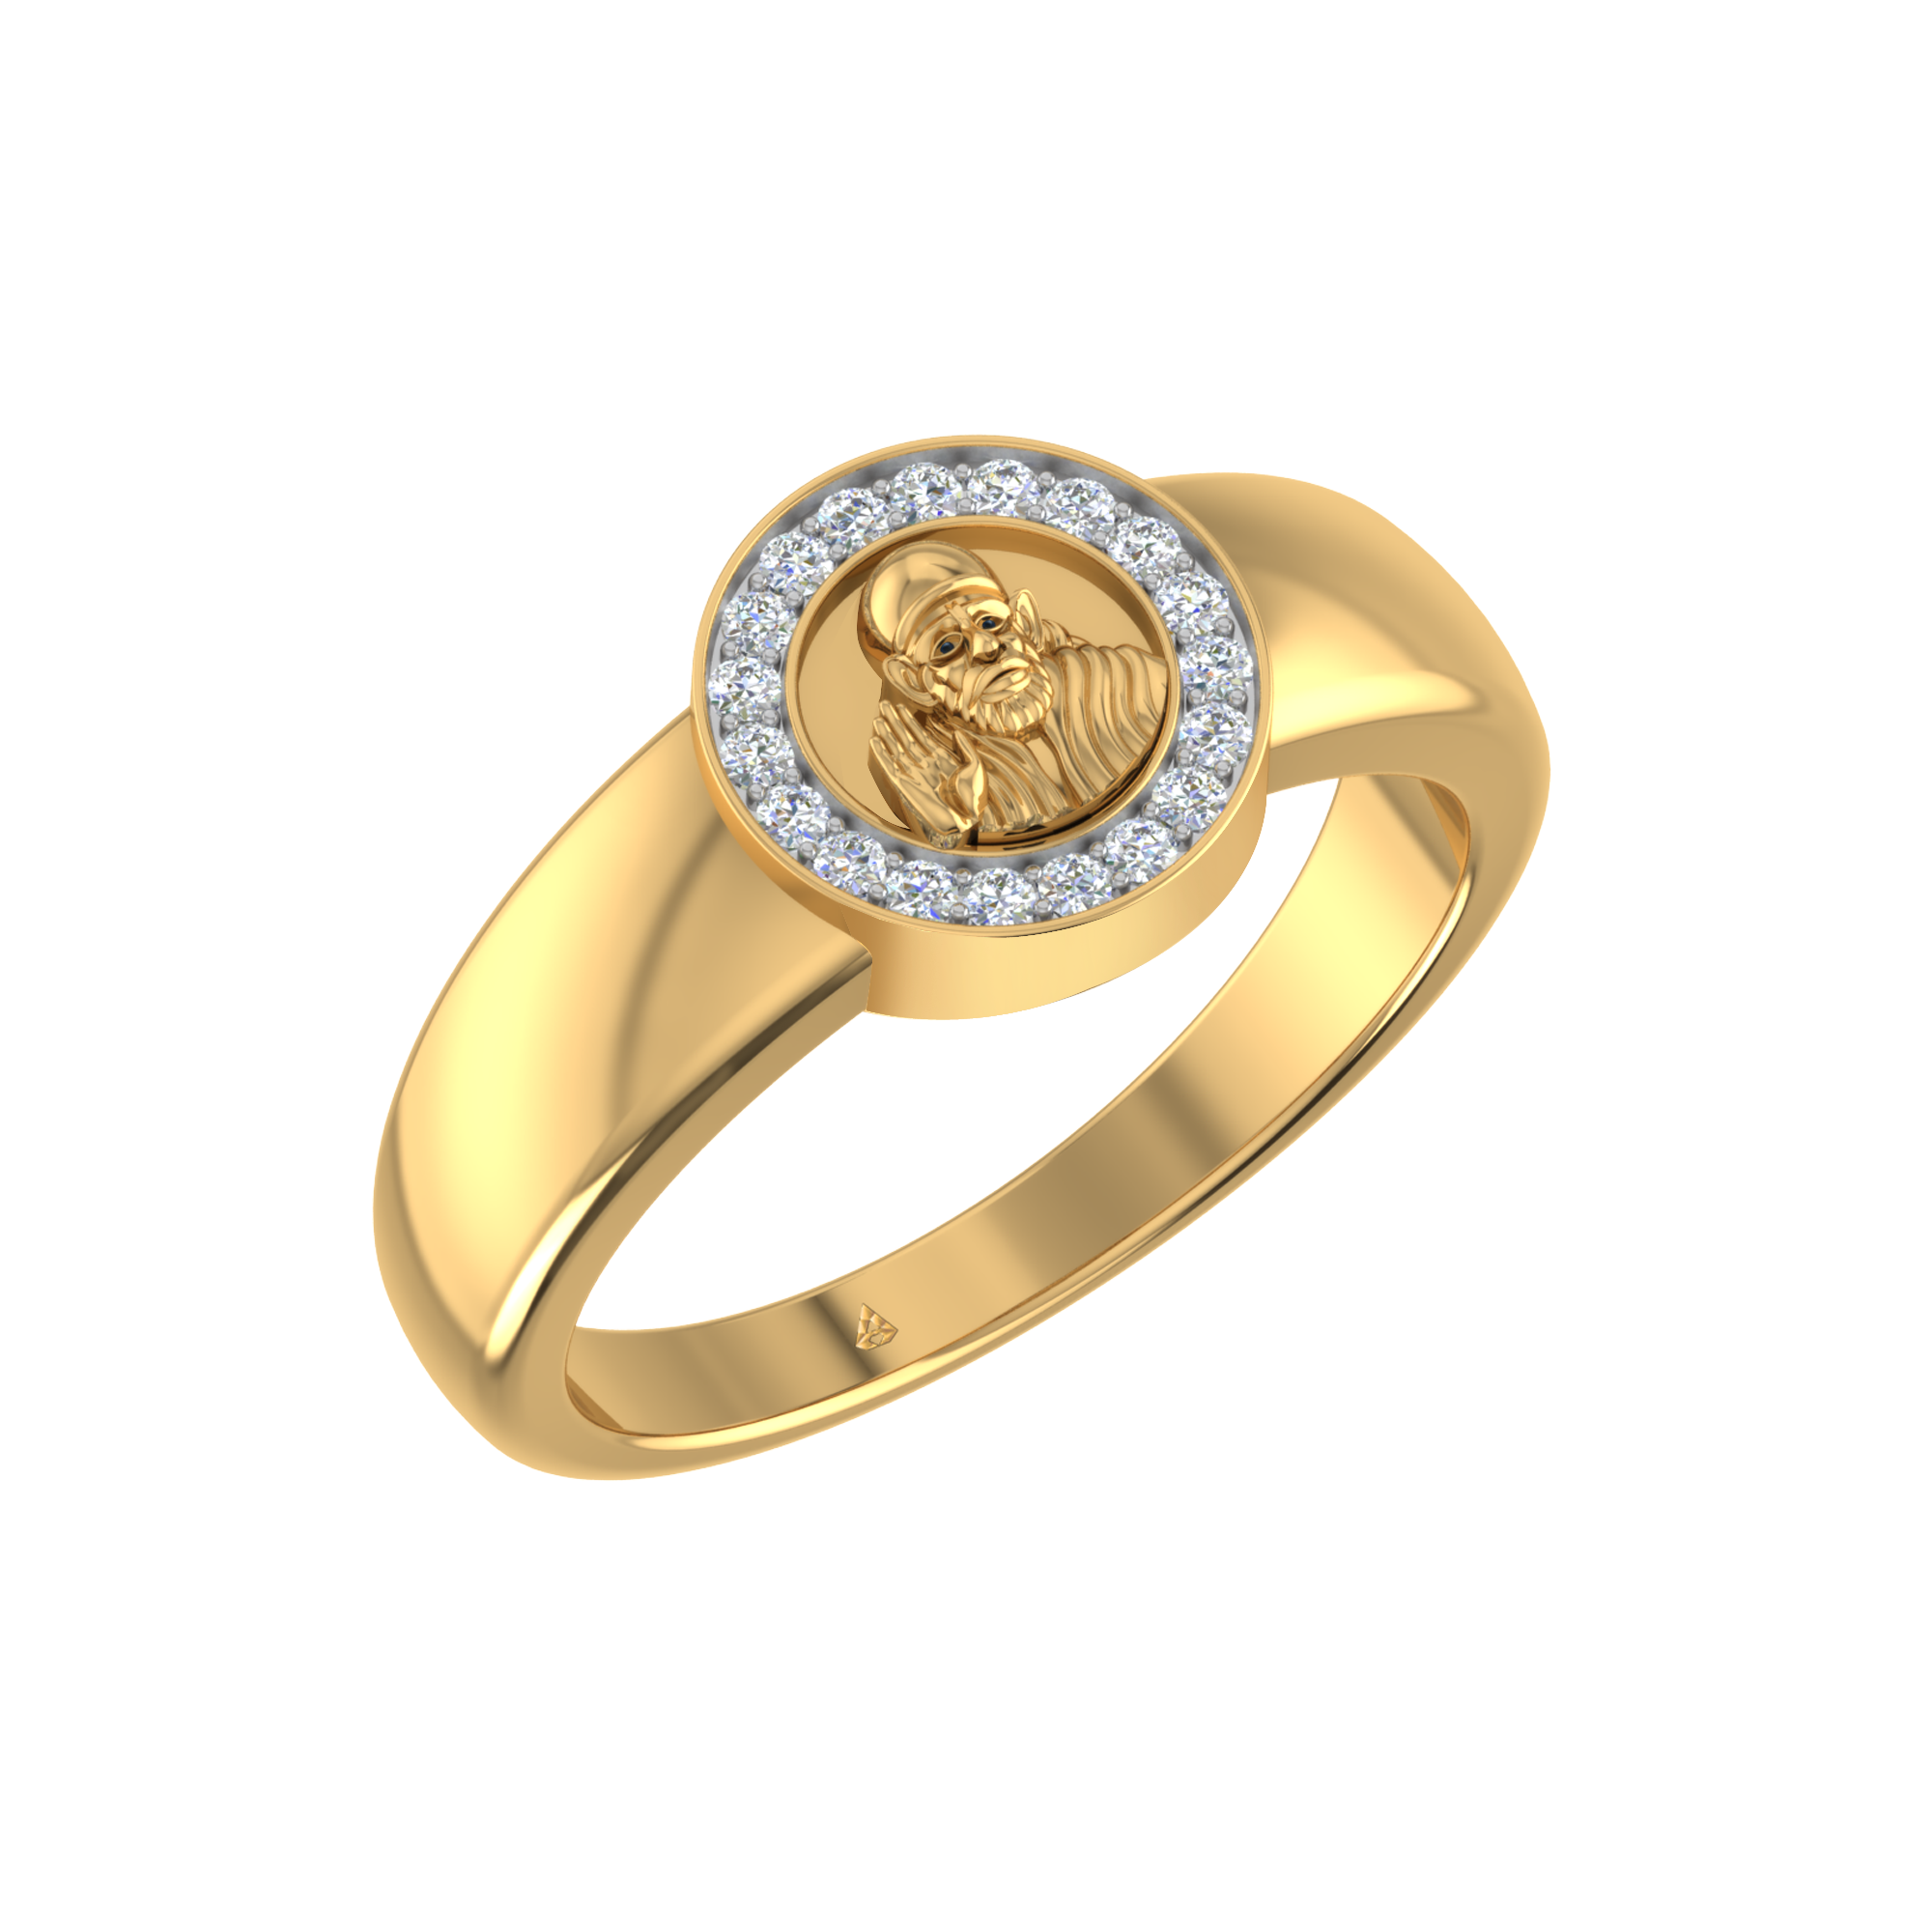 Buy 22Kt Plain Gold Gents Sai Baba Ring 93VC8669 Online from Vaibhav  Jewellers